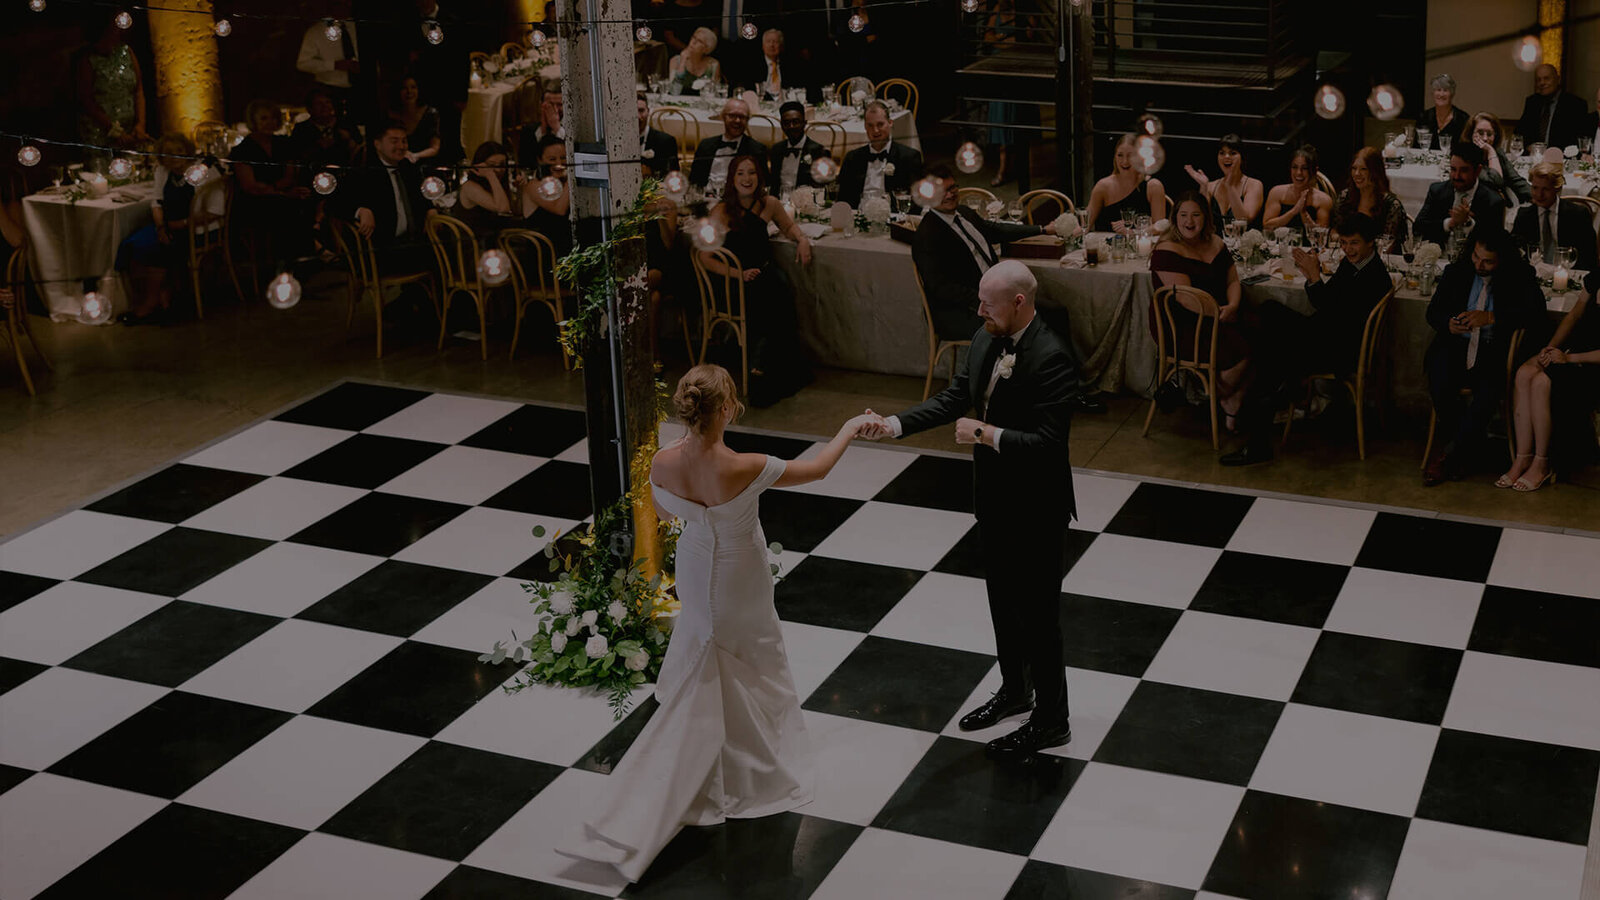 A bride and groom joyfully dance on a checkered floor, celebrating their union at Winslow Baltimore, photographed by Get Ready Photo.